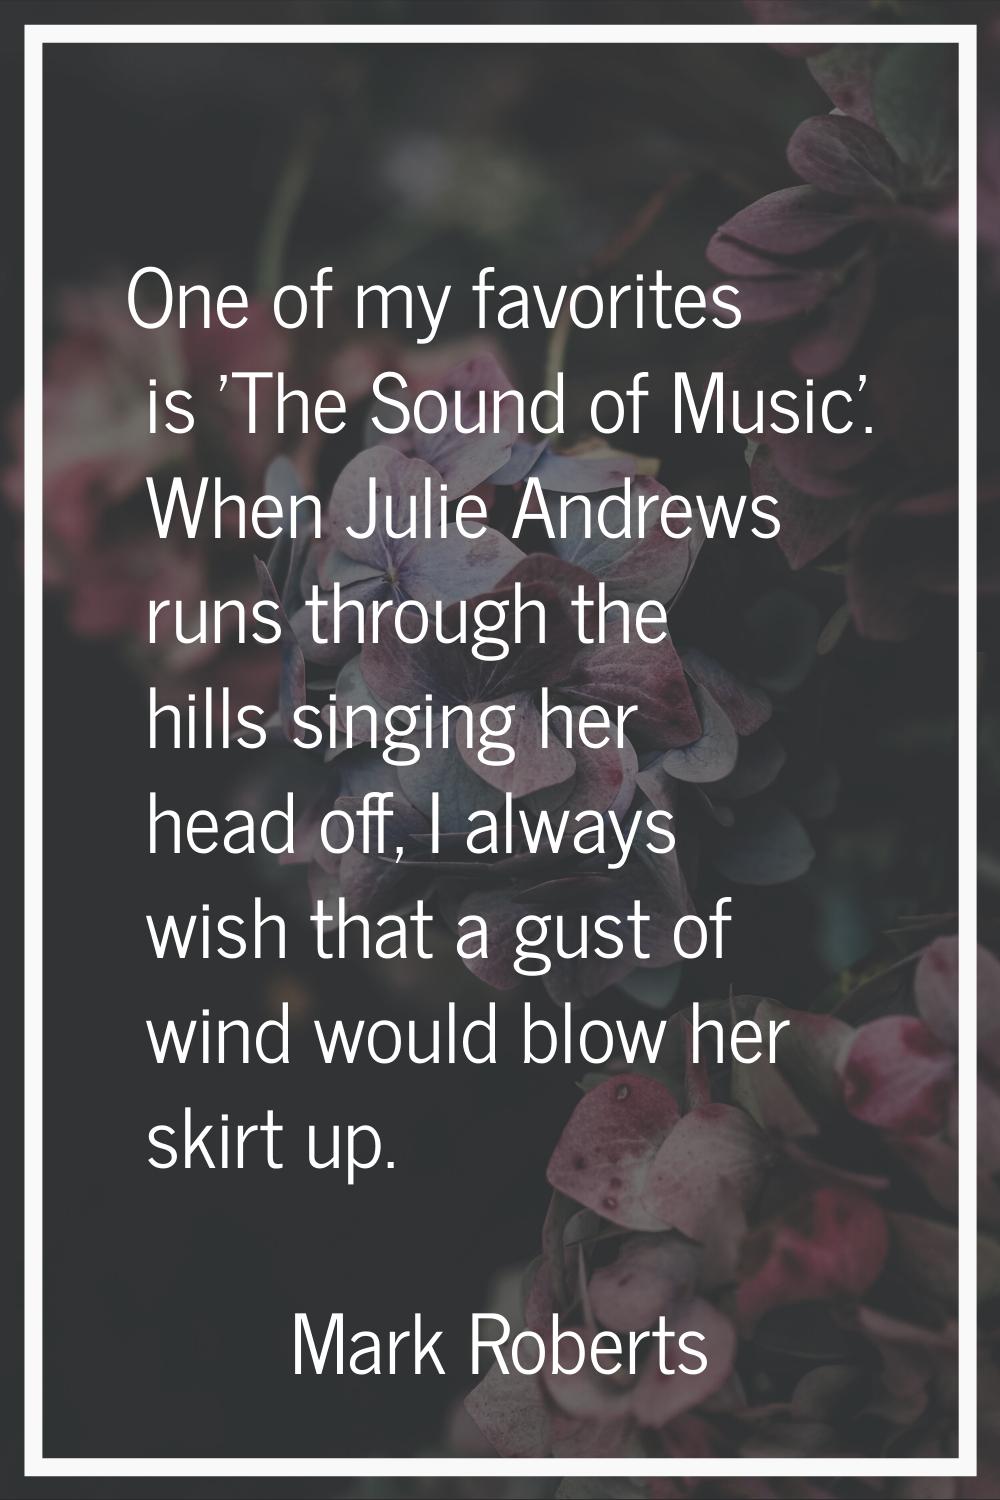 One of my favorites is 'The Sound of Music'. When Julie Andrews runs through the hills singing her 